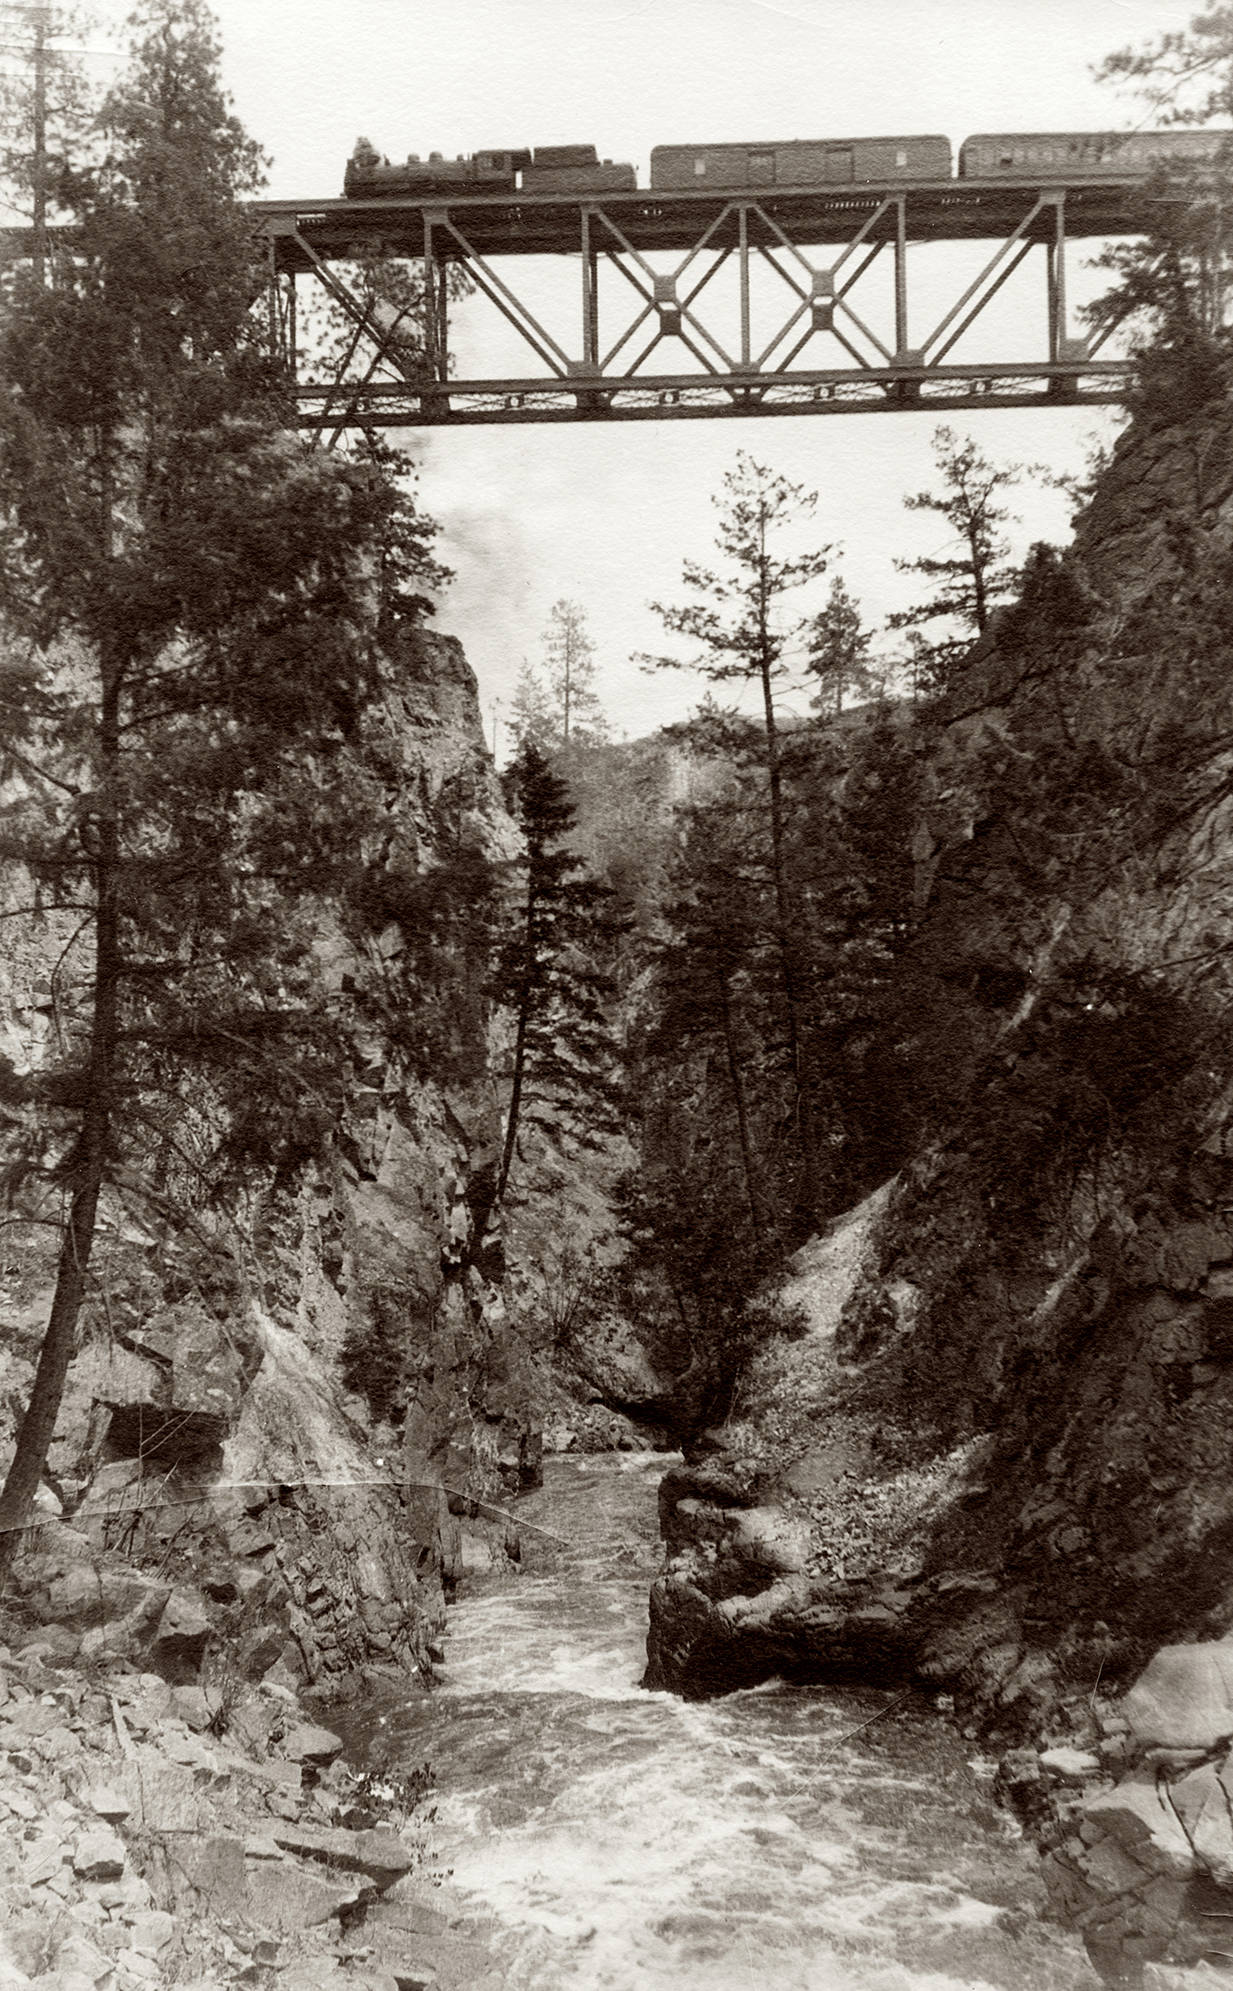 The Trout Creek Trestle connected Summerland with the rest of the Kettle Valley Railway line. The bridge was constructed in 1913. (Photo courtesy of the Summerland Museum)